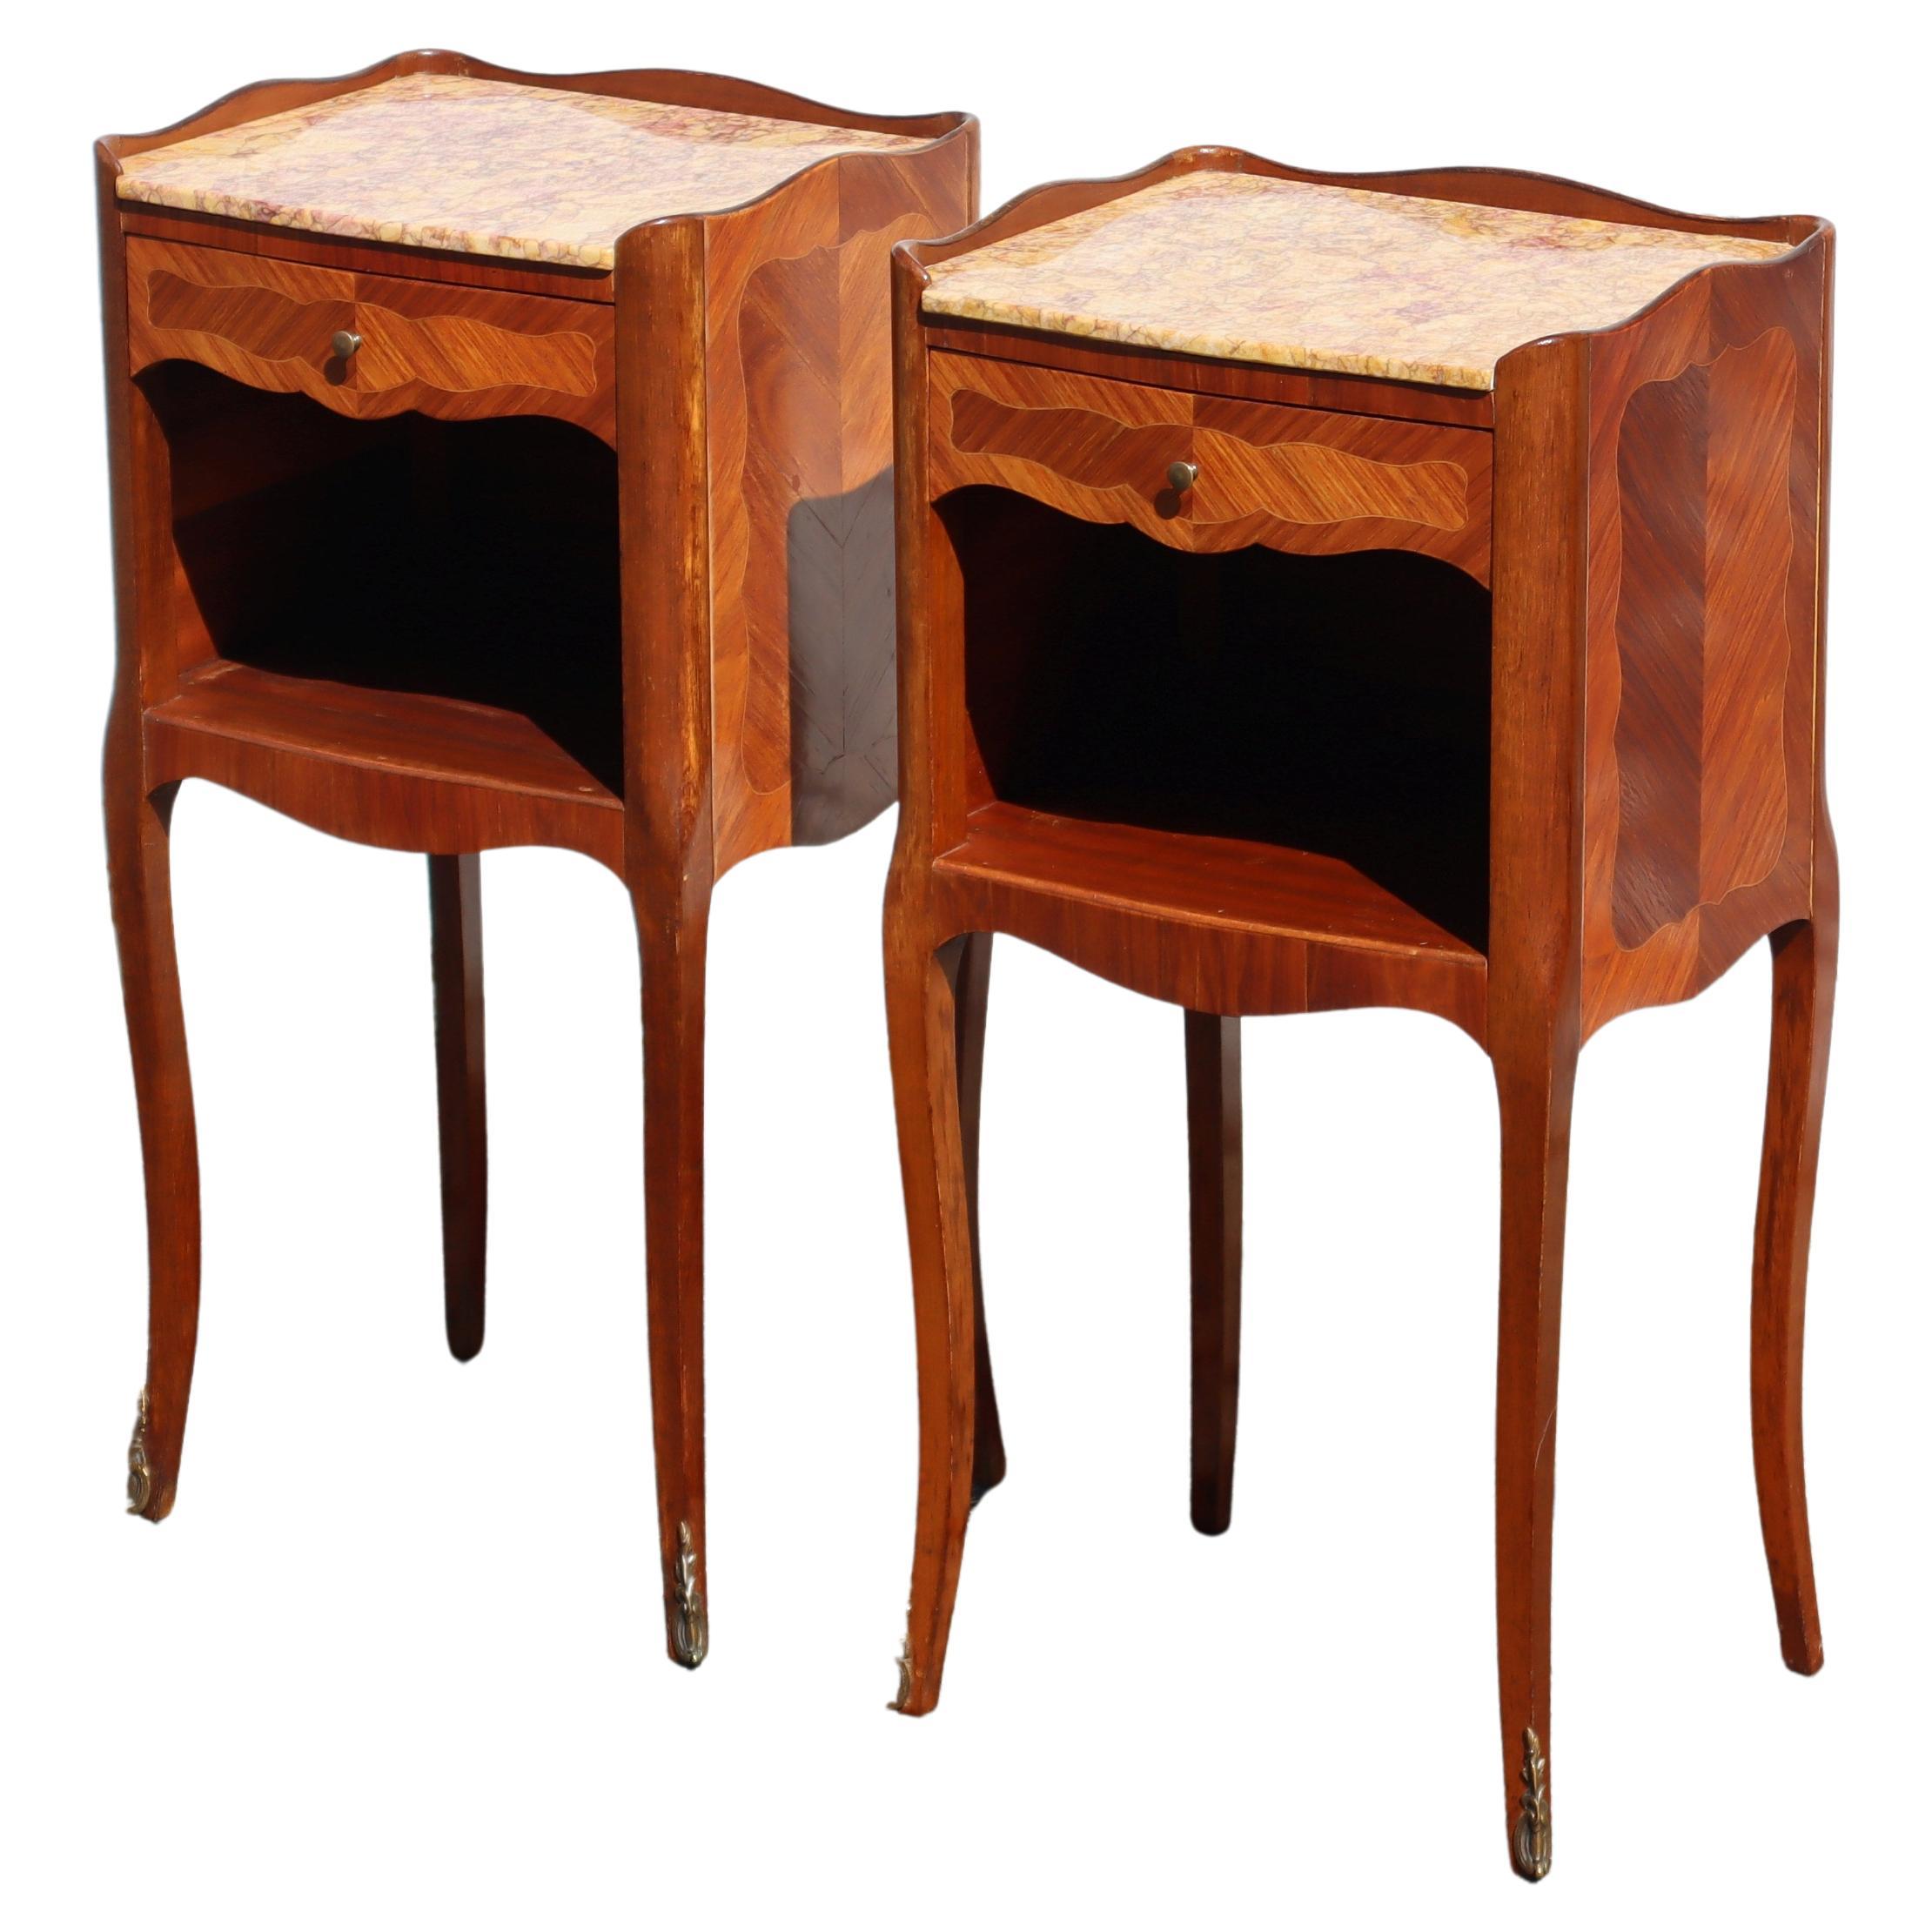 2 French Antique Rosewood Marquetry Nightstands-Pair Marble&Wood Night Tables  For Sale